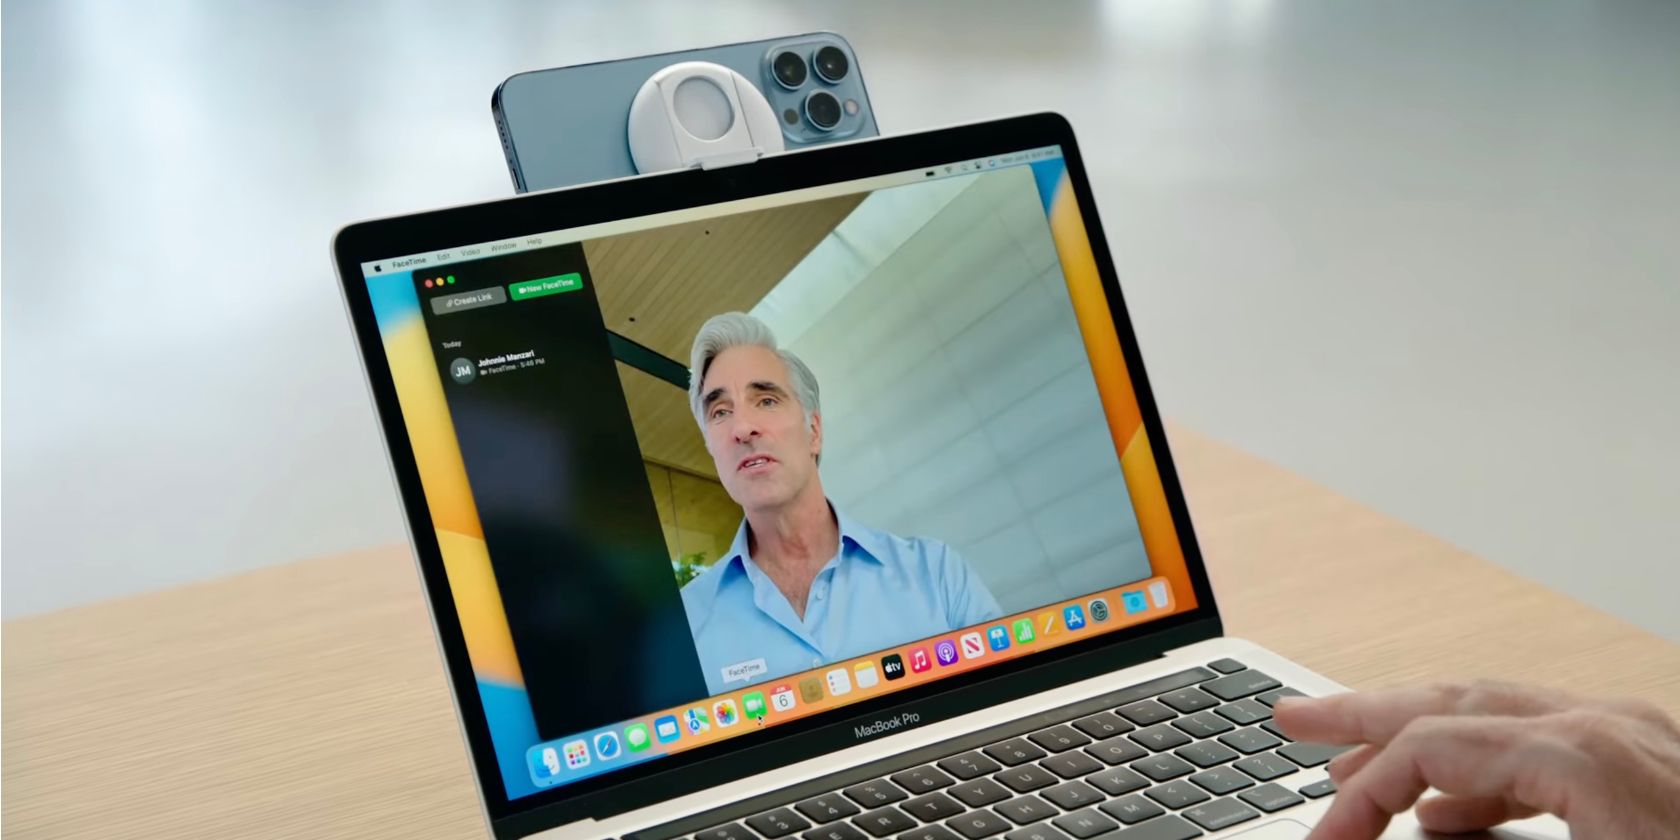 The MacBook uses the iPhone as a webcam